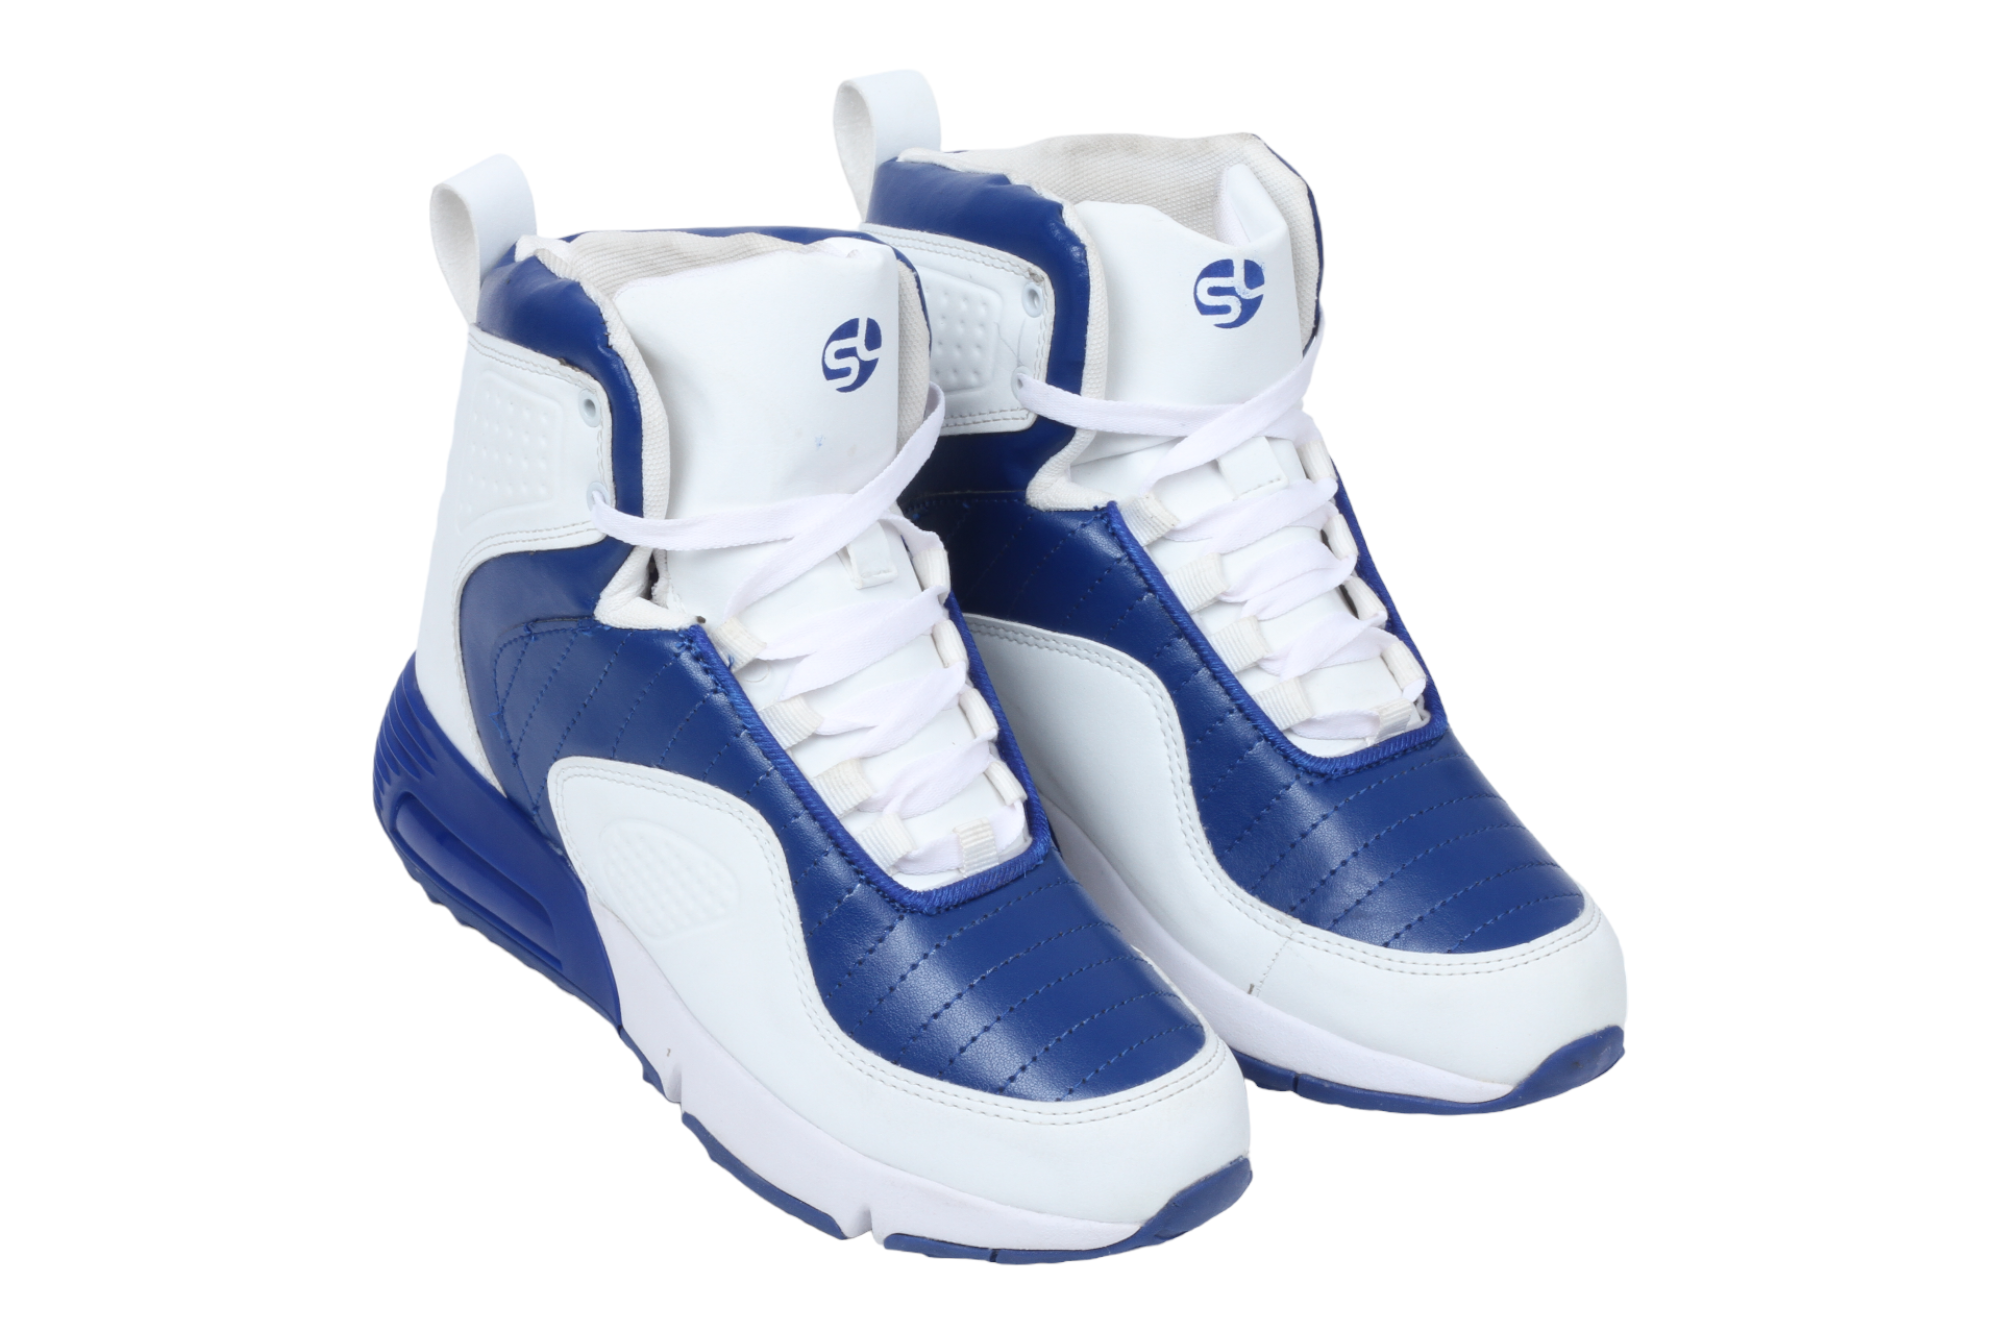 CHANEL, Shoes, Chanel High Top Sneakers